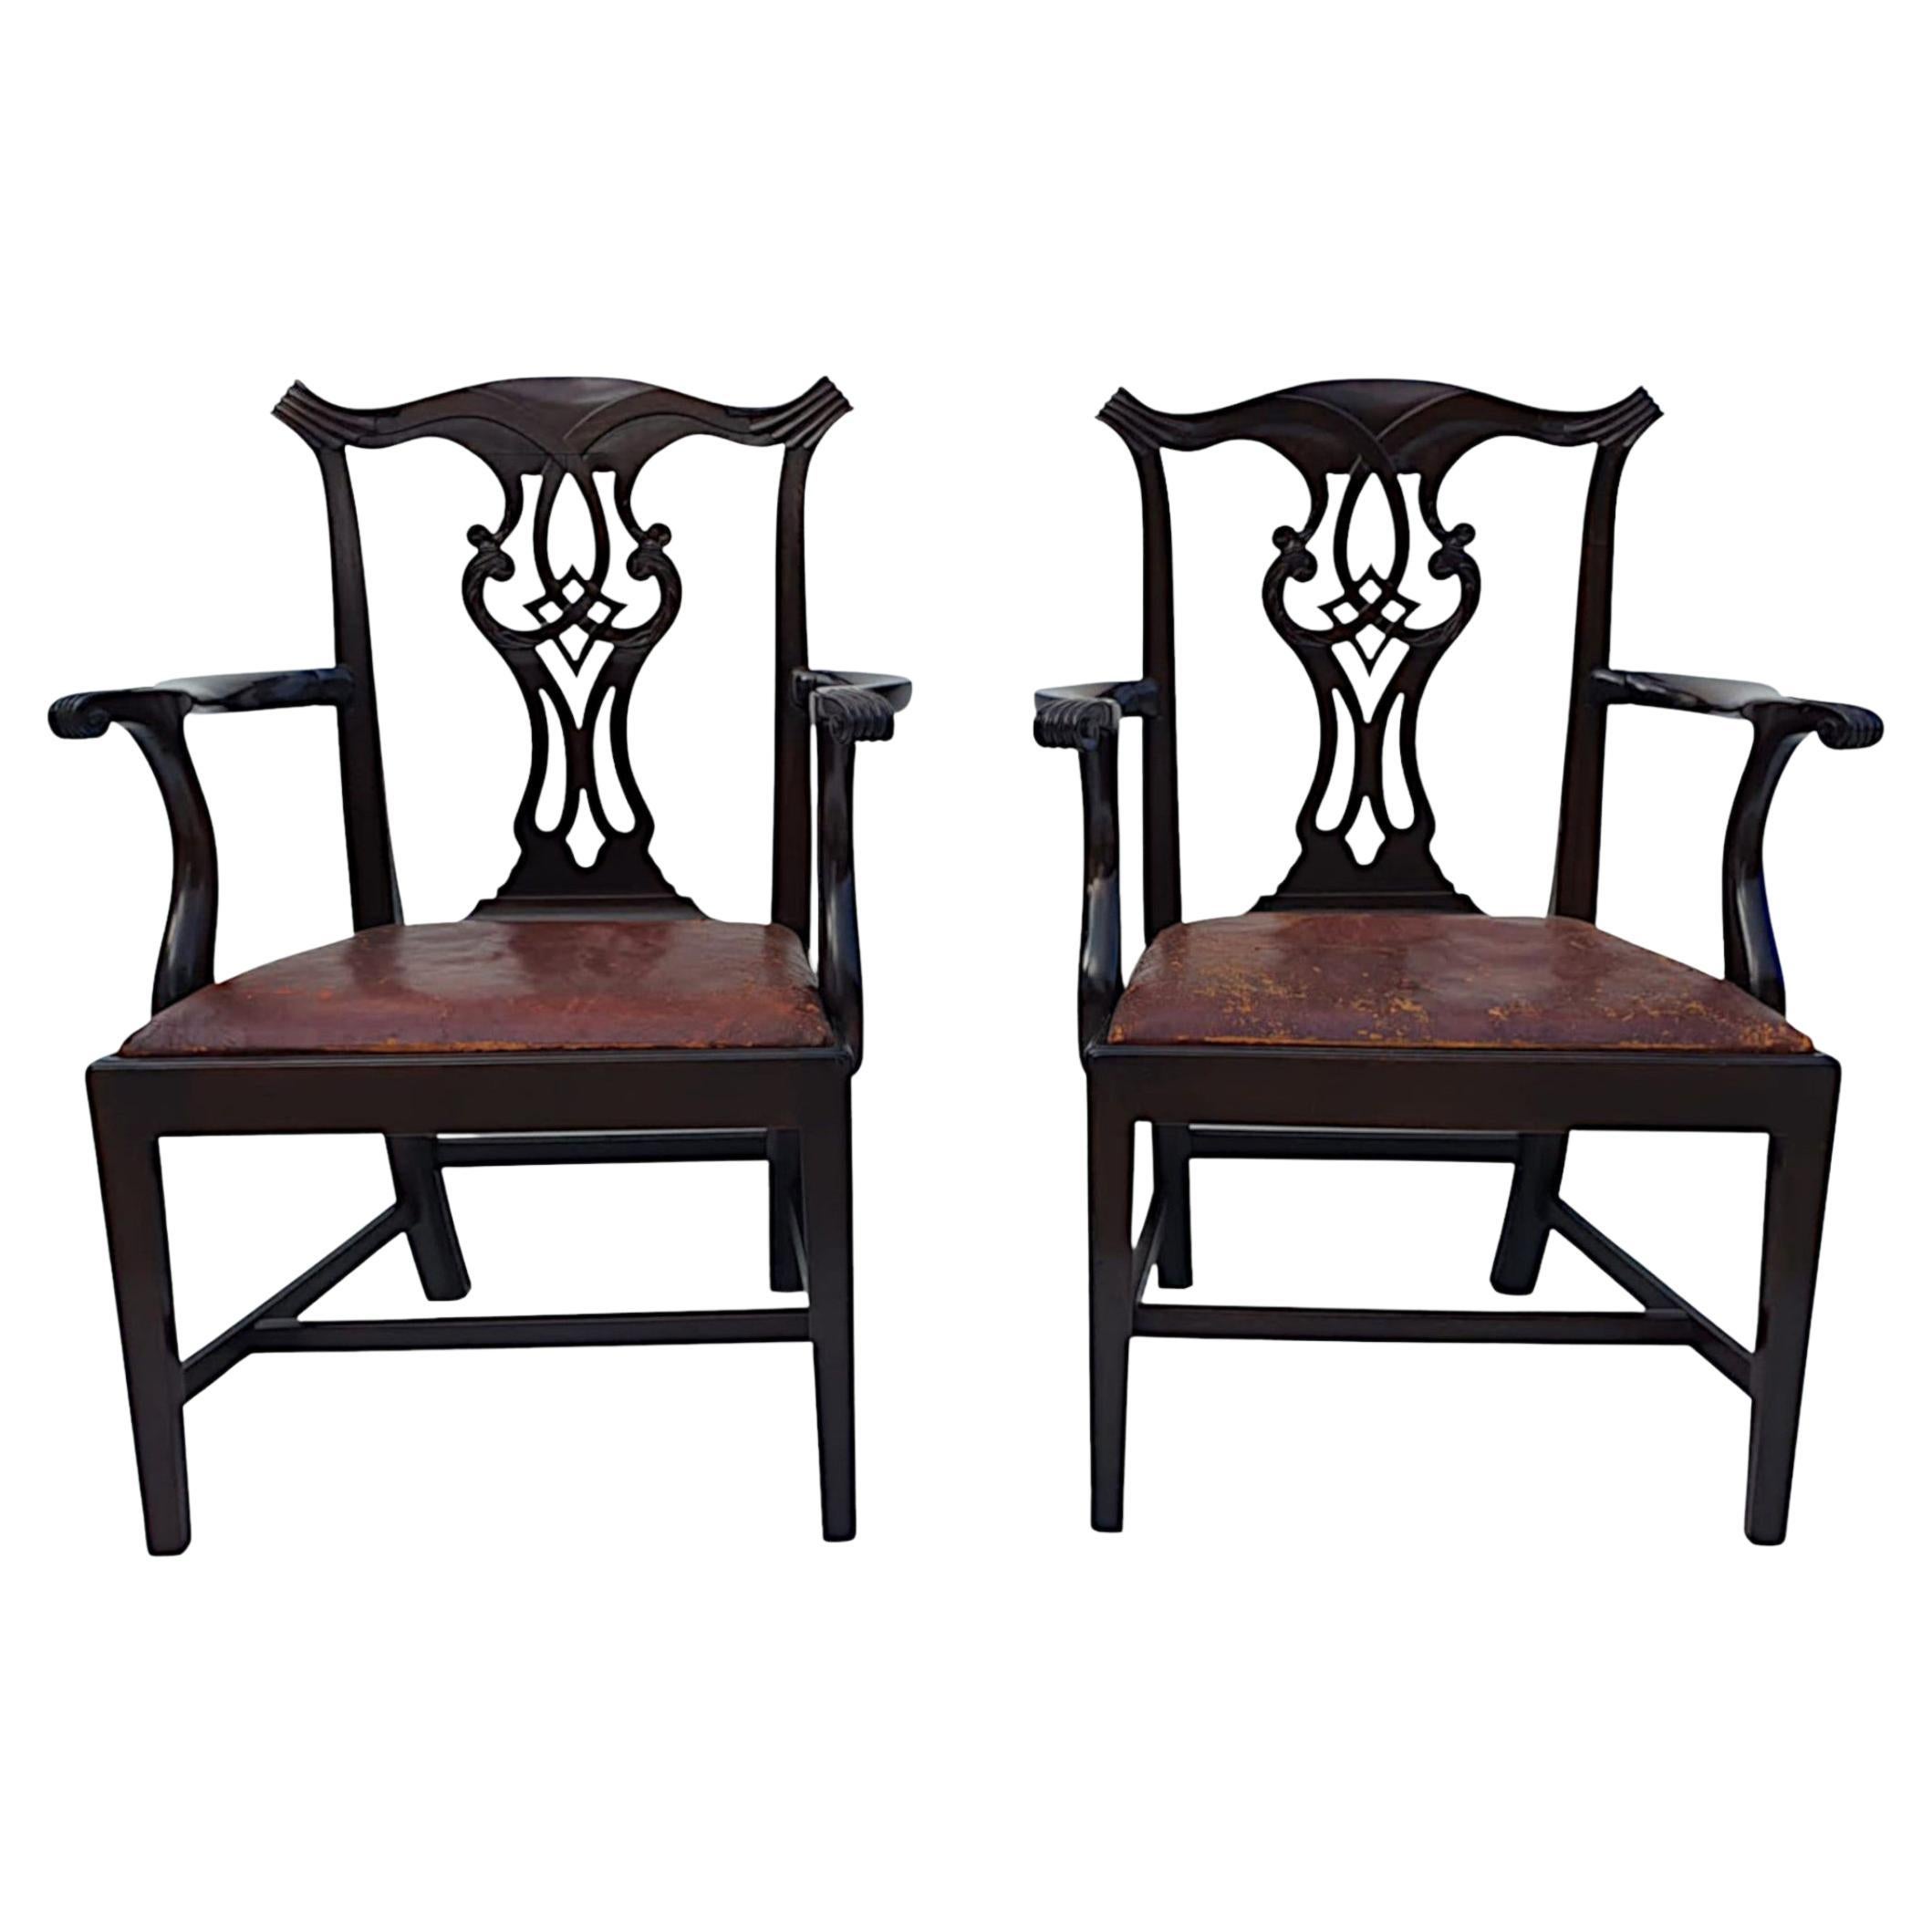 Stunning Pair of 19th Century Georgian Design Armchairs After Thomas Chippendale For Sale